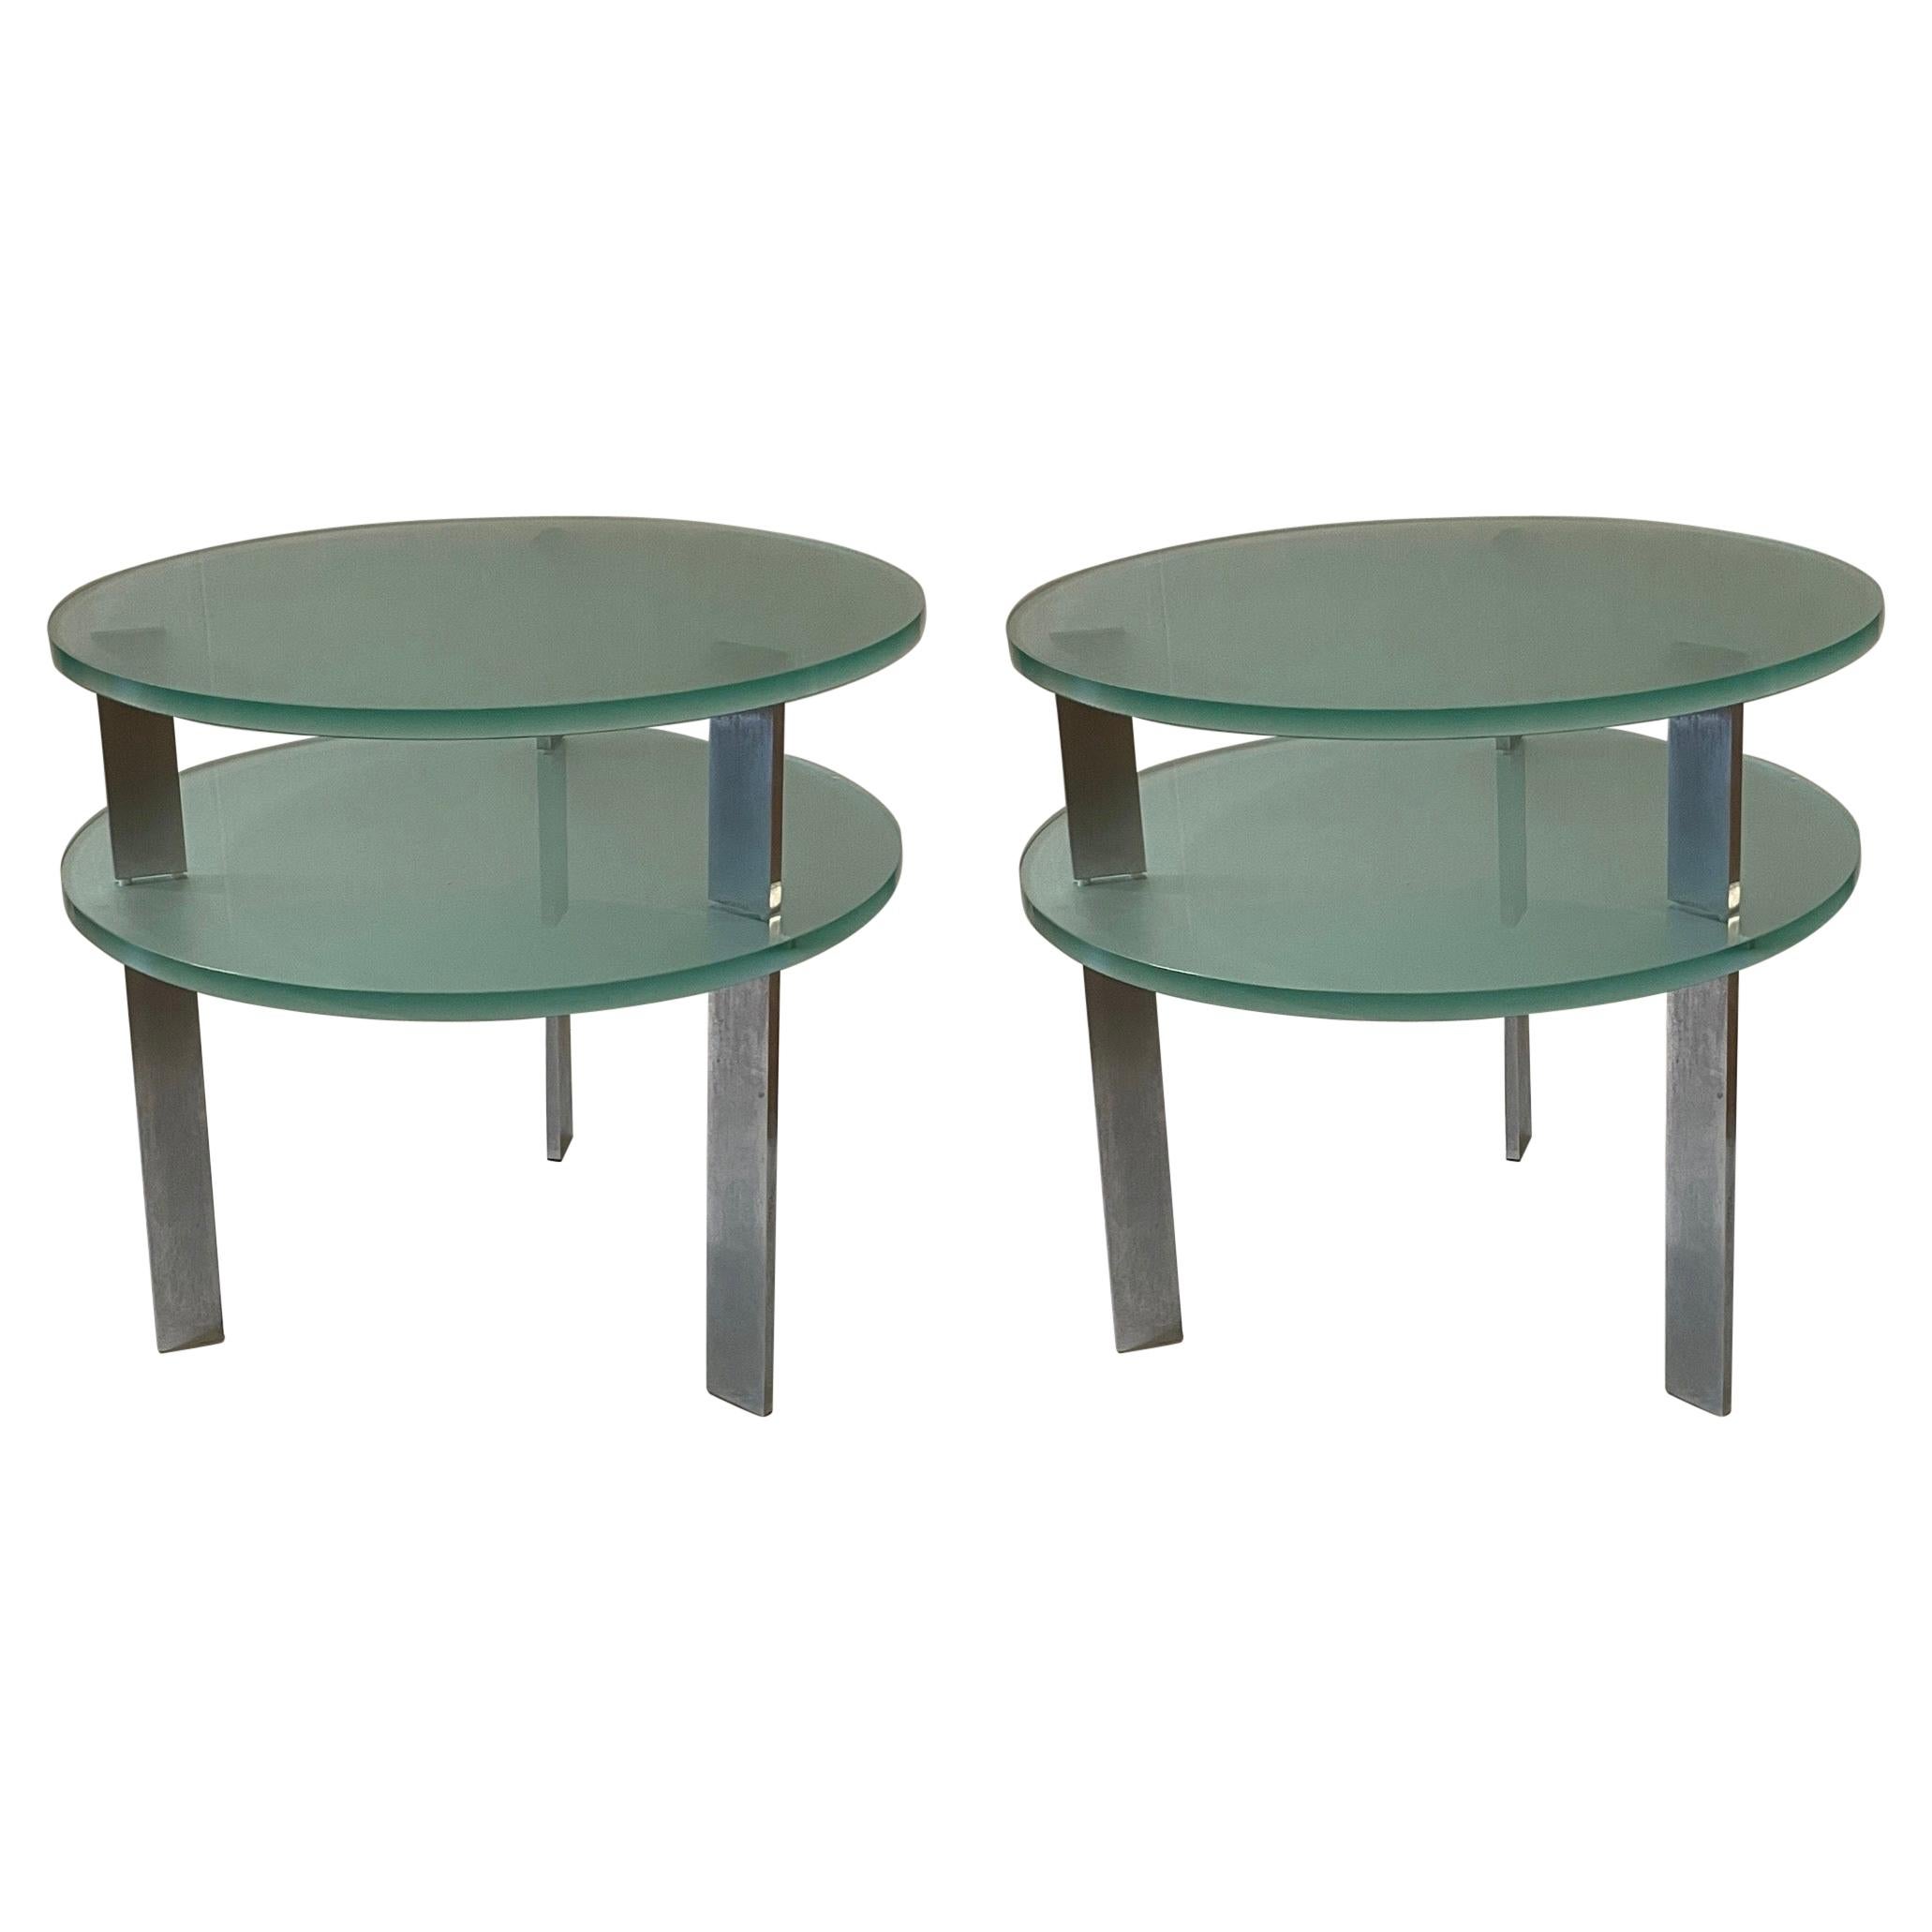 Pair of Postmodern Glass & Aluminum Legs Tables Designed by Peter Coan for Pace